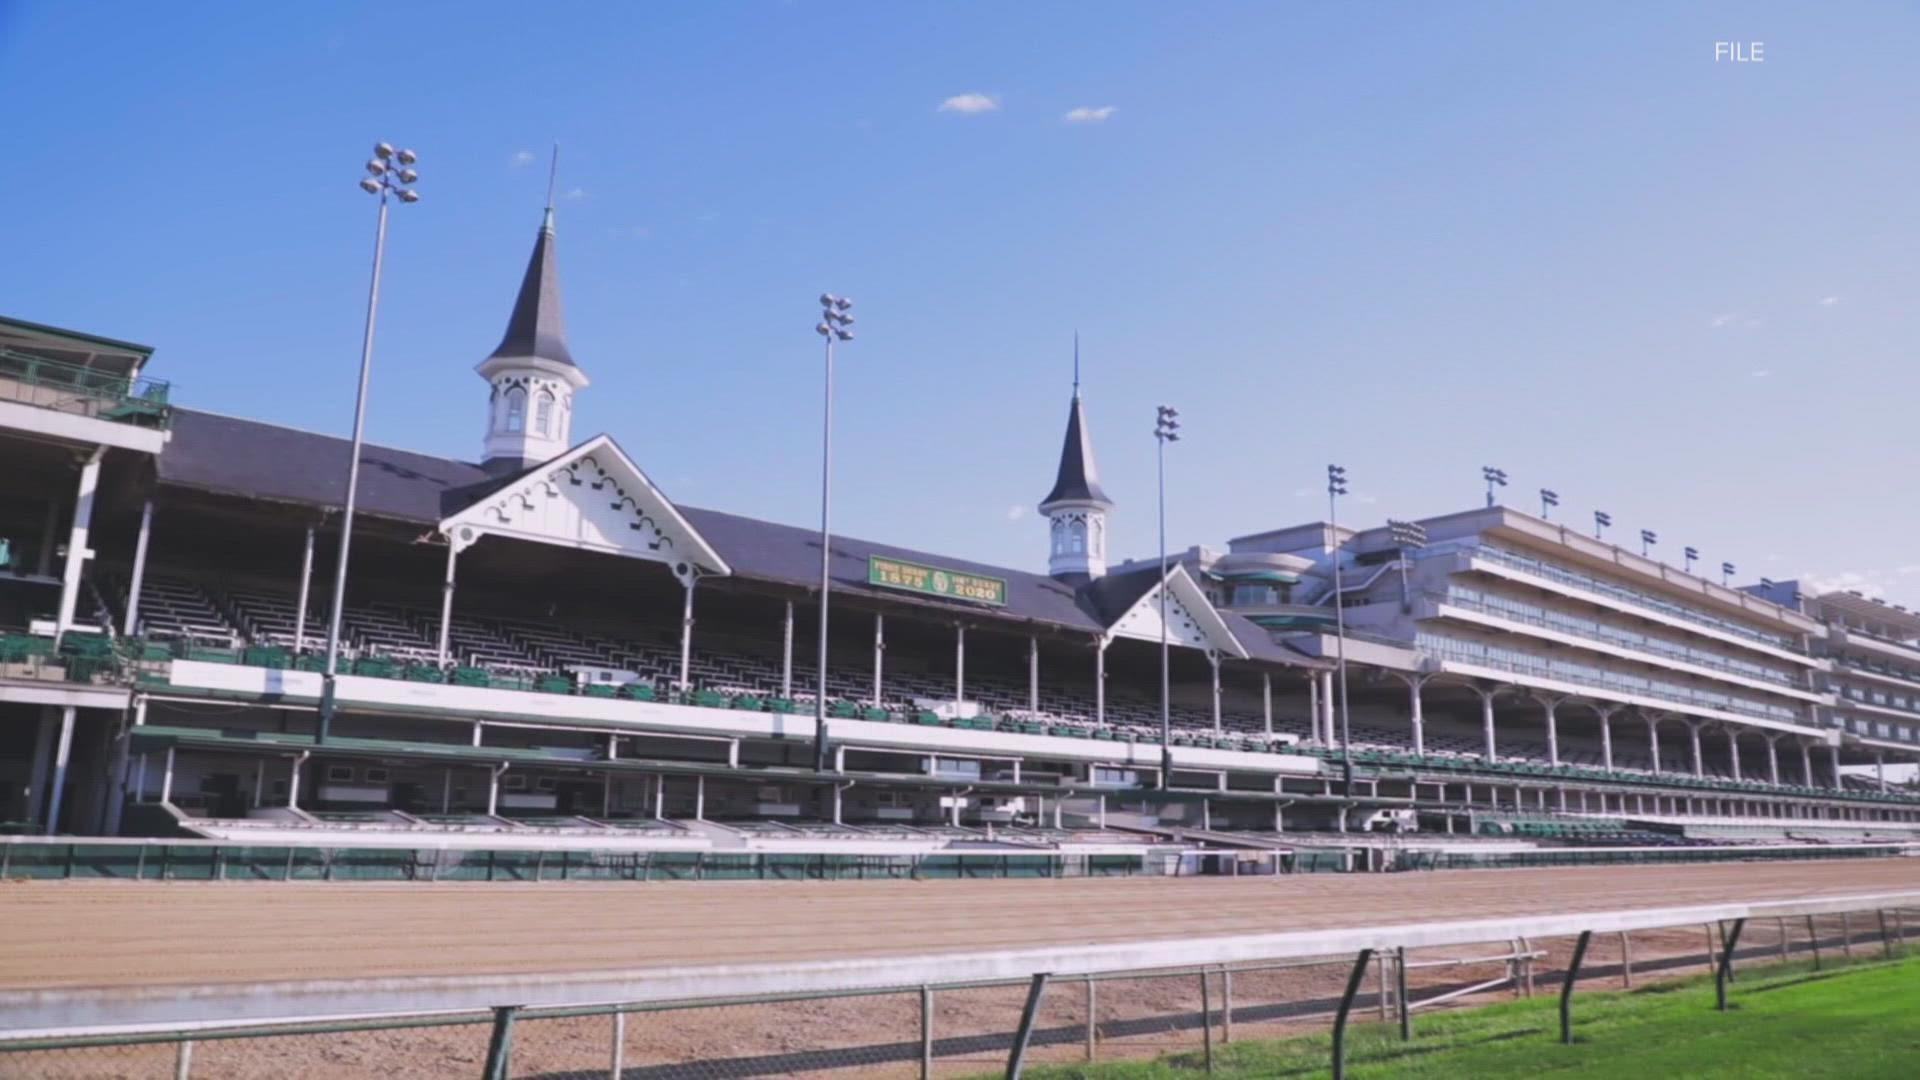 Preserving Kentucky Derby history is something that requires relentless dedication, curiosity, and daily desire to share it. Chris Goodlett is the man for the job.